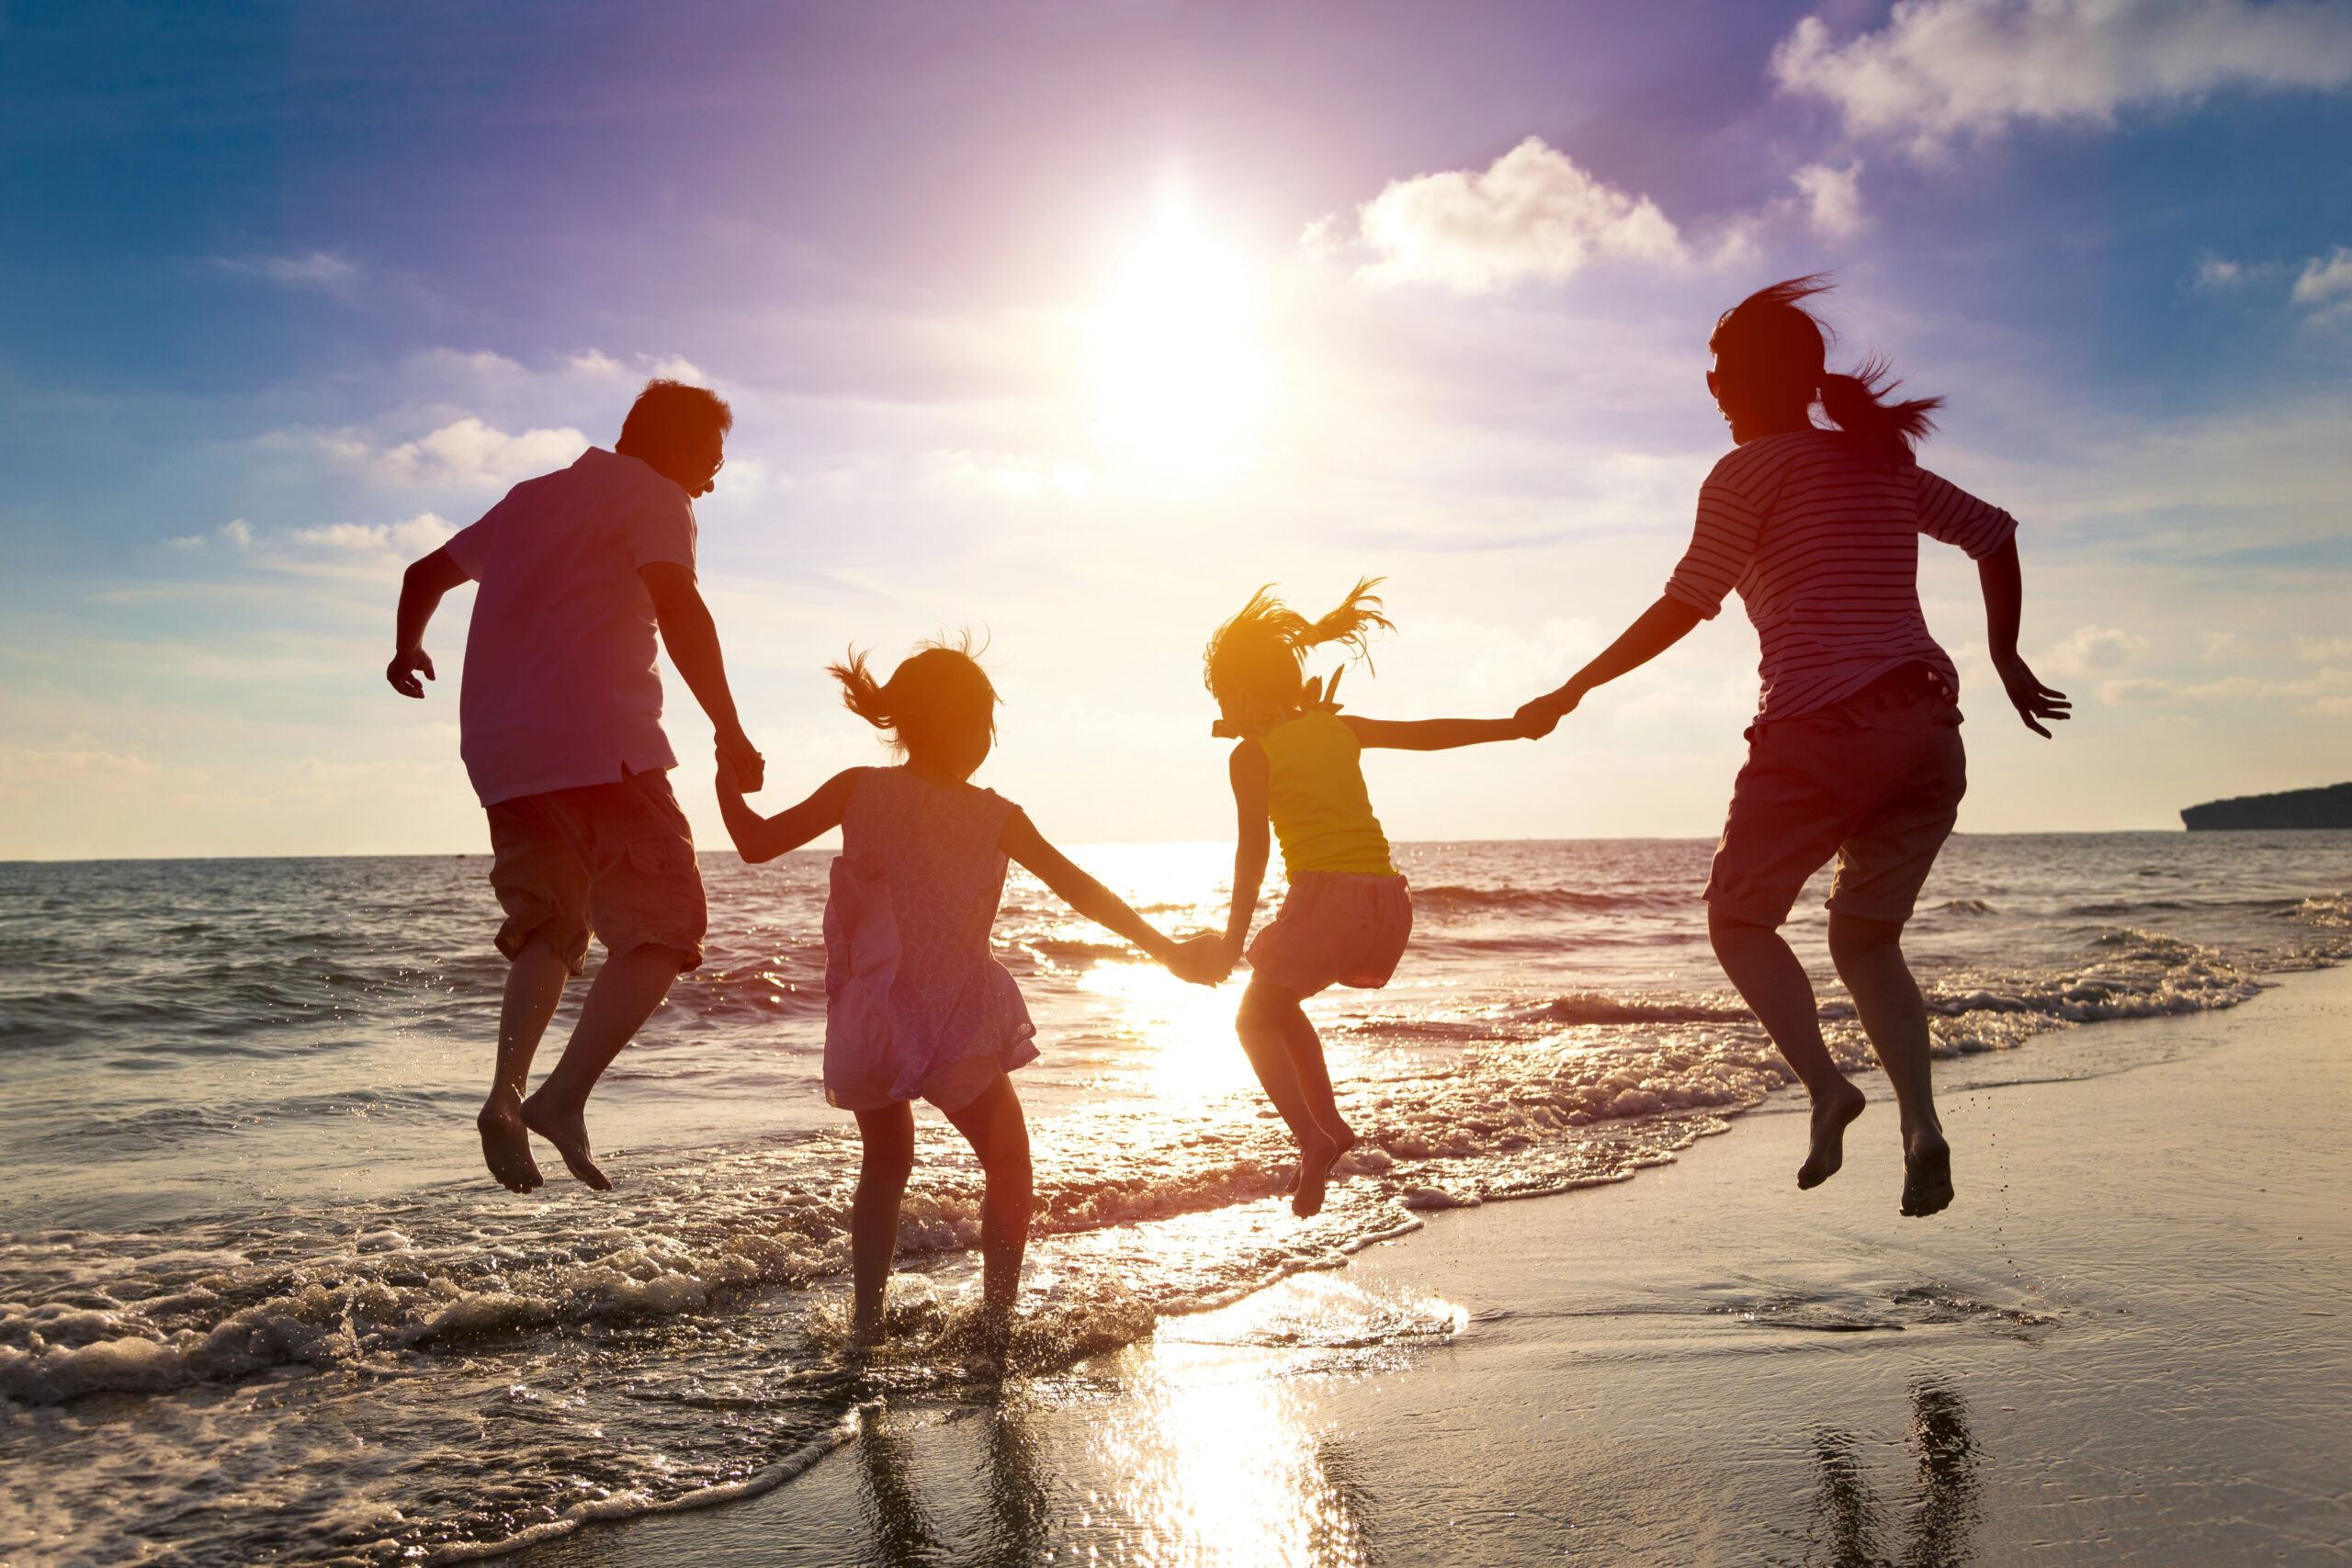 Family on the beach, holding hands and jumping with the sun setting